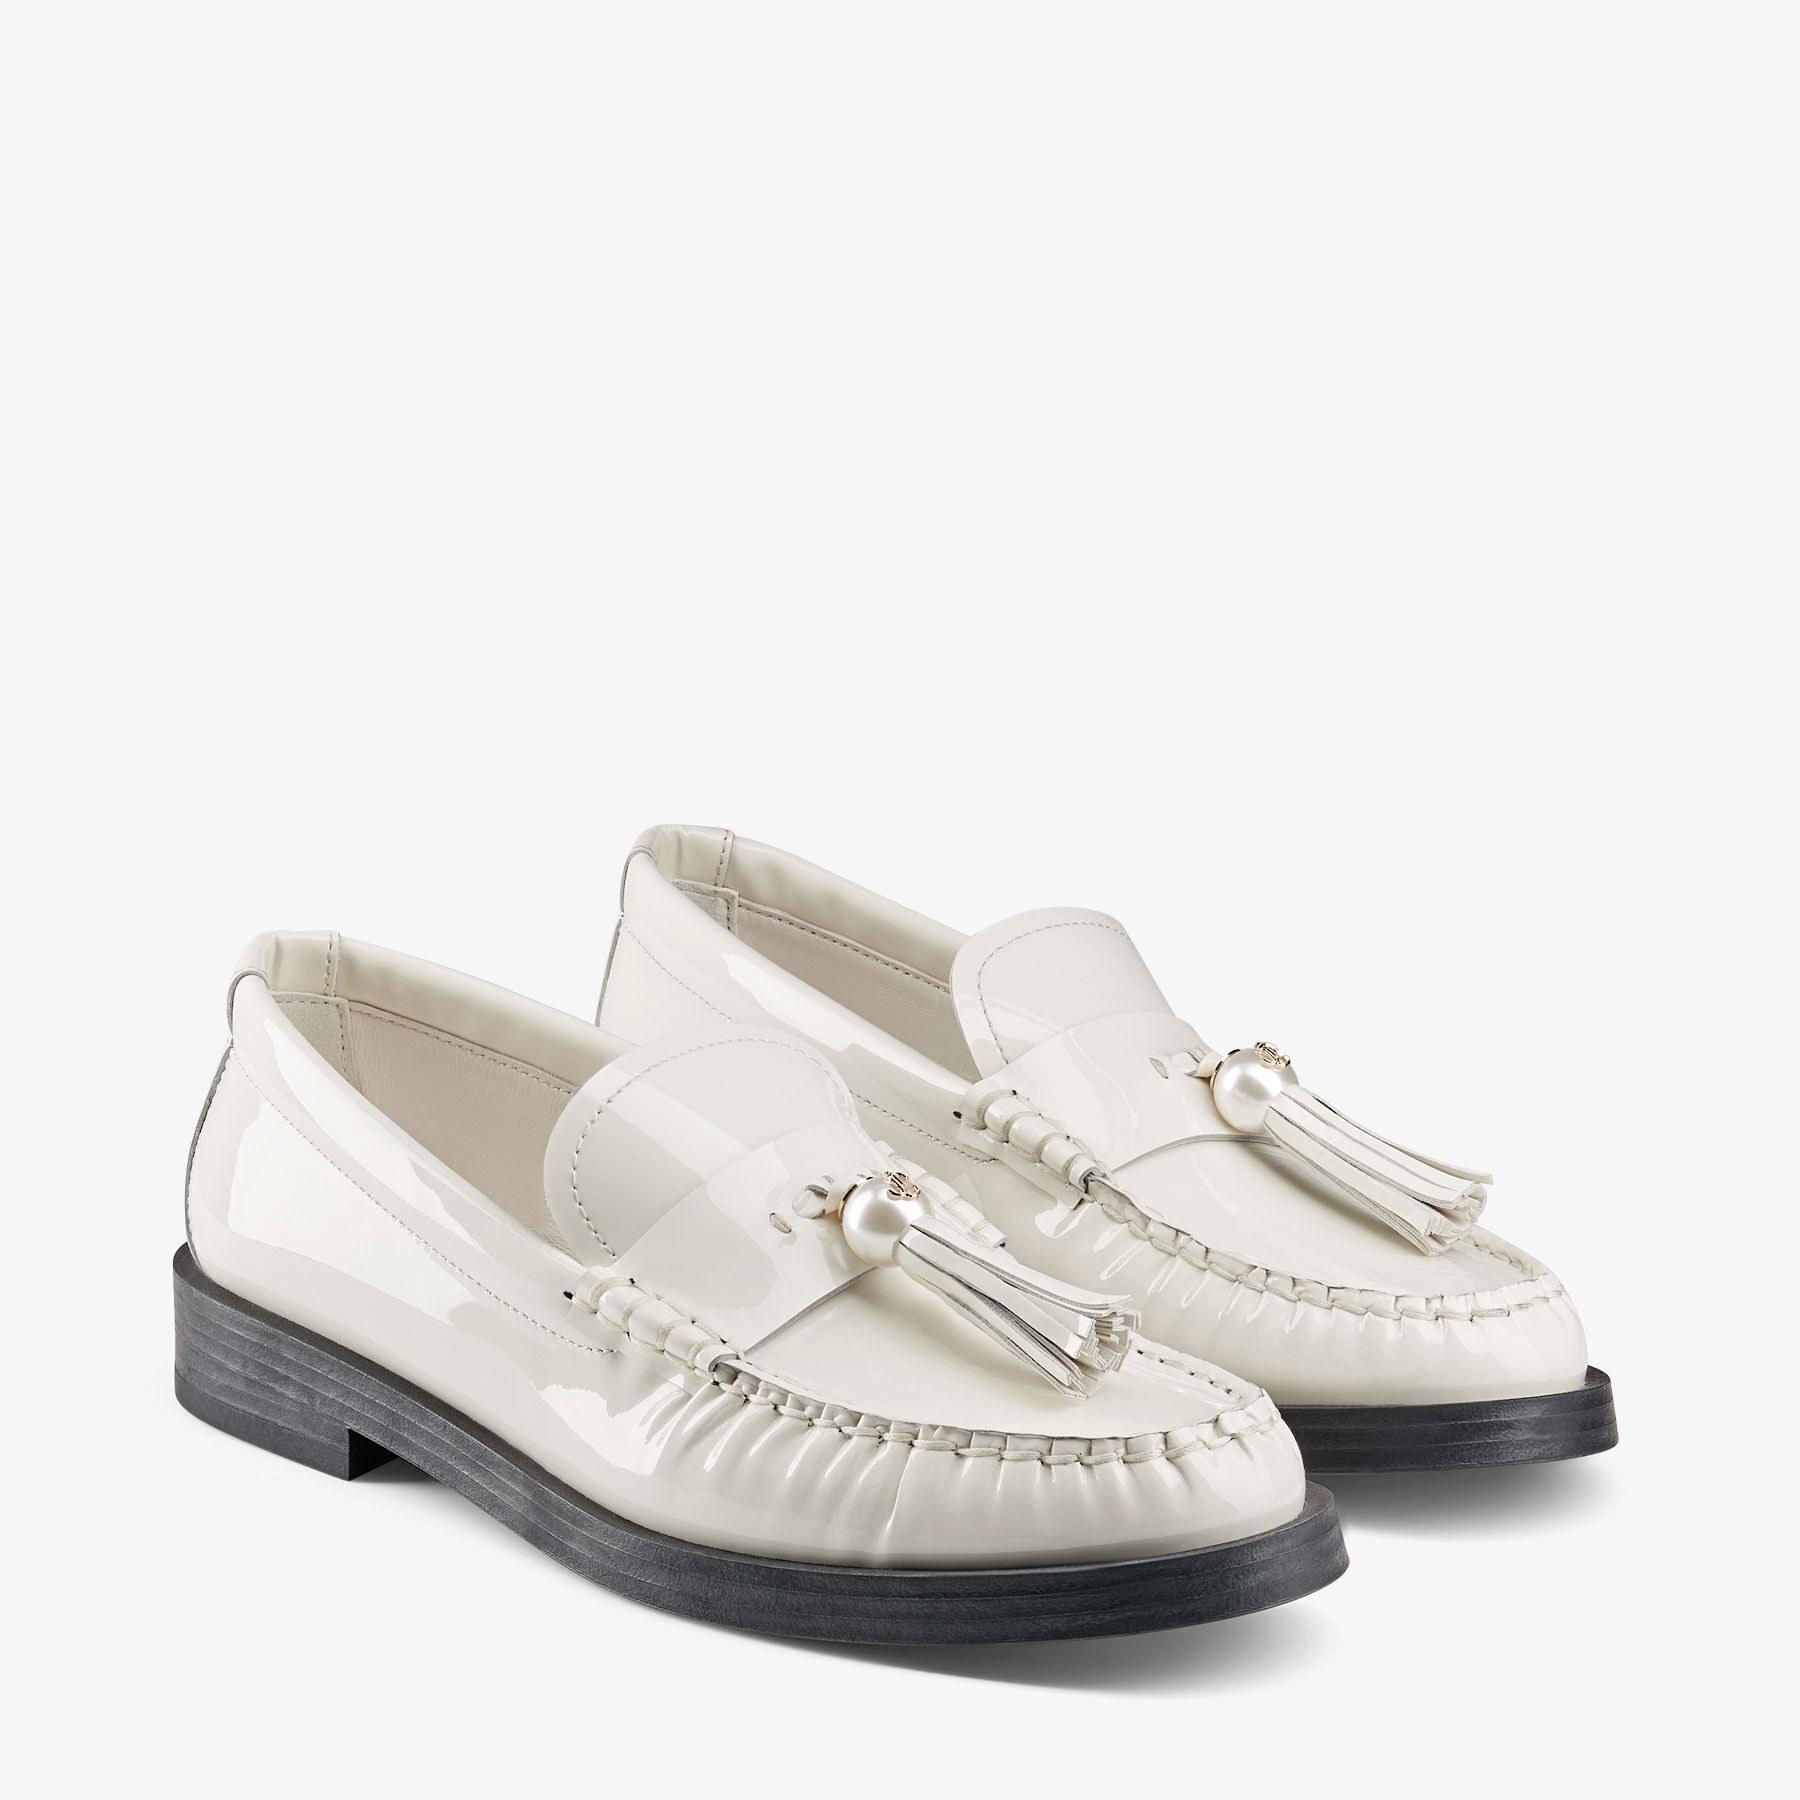 Addie/Pearl | Latte Patent Leather Flat Loafers with Pearl Tassel | JIMMY  CHOO